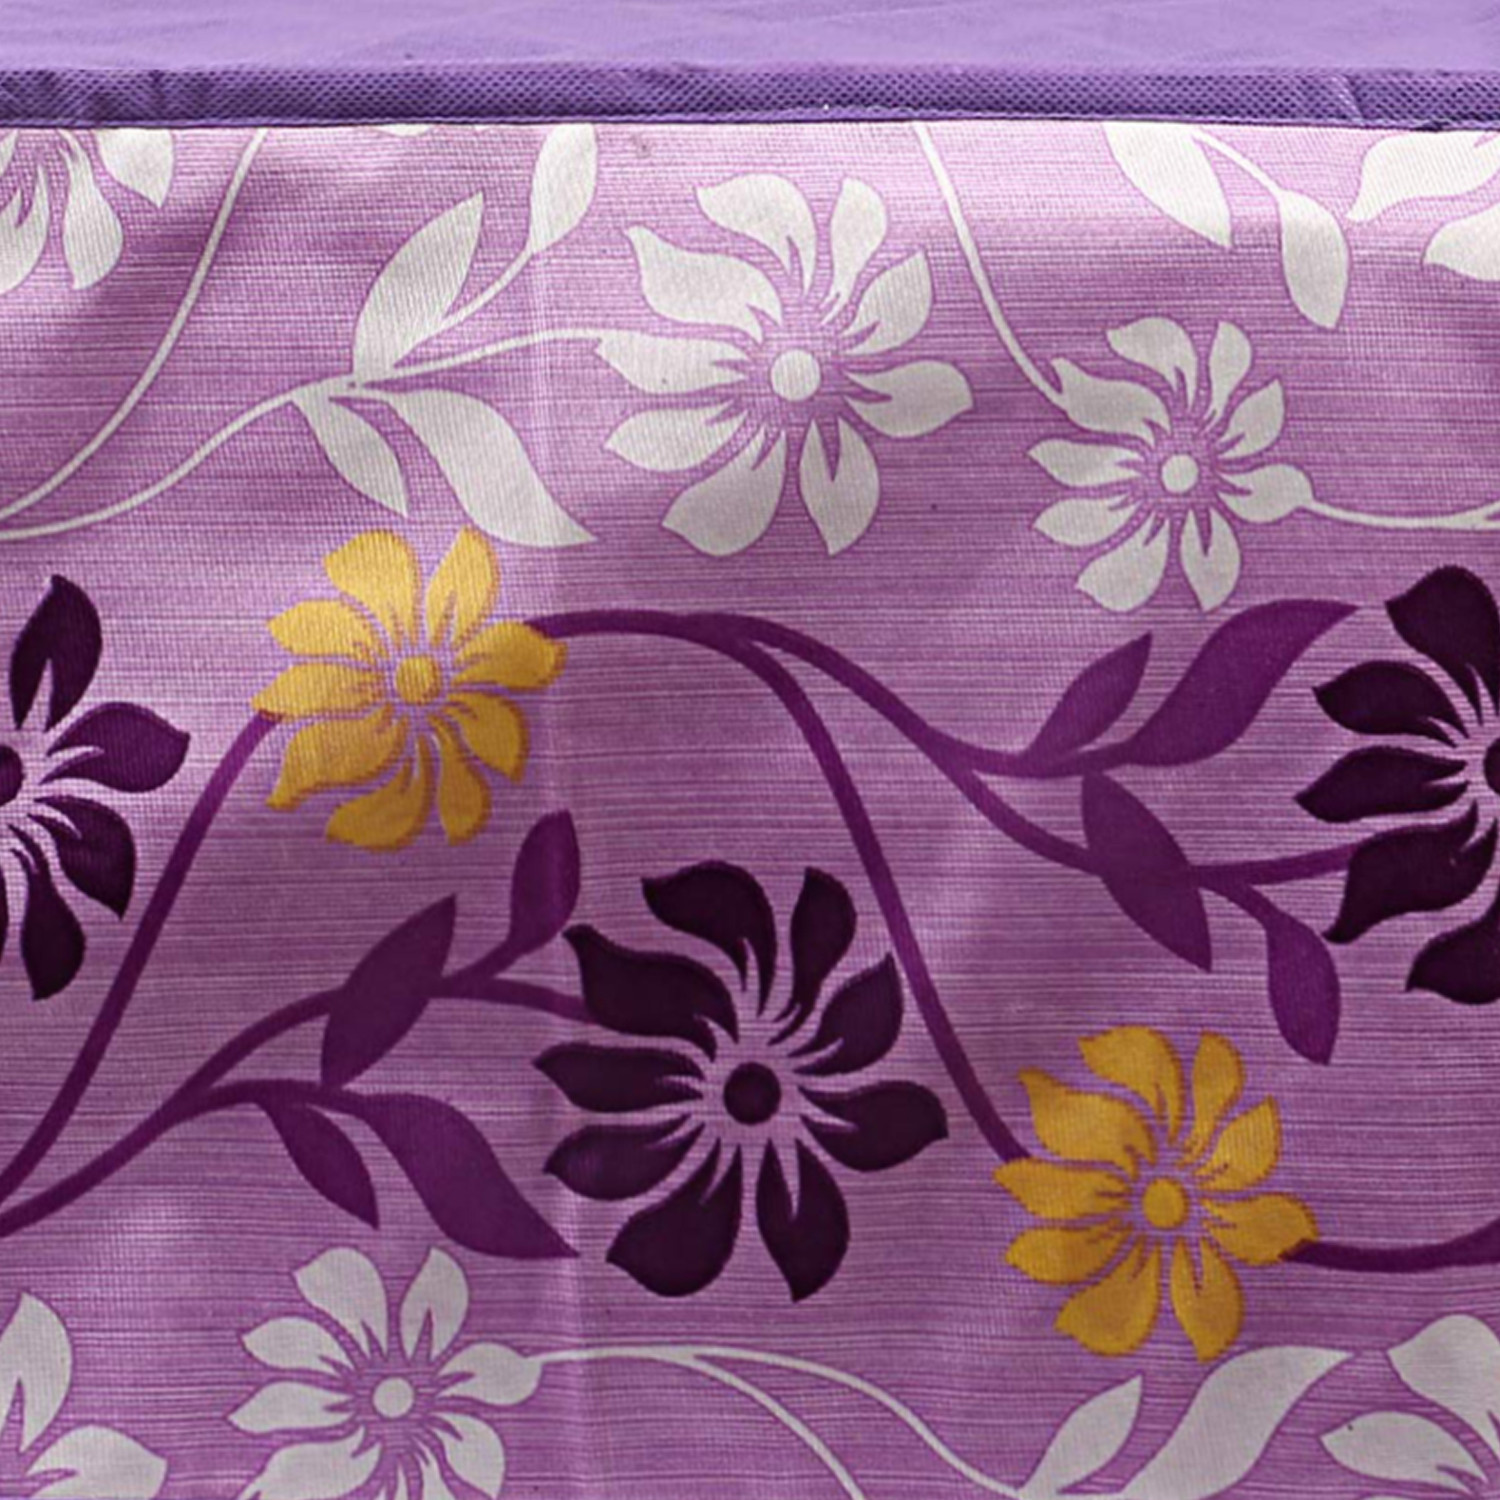 Kuber Industries Multiuses Polyester Floral Print Microwave Oven Cover For Home & Kitchen 25 Ltr. (Purple)